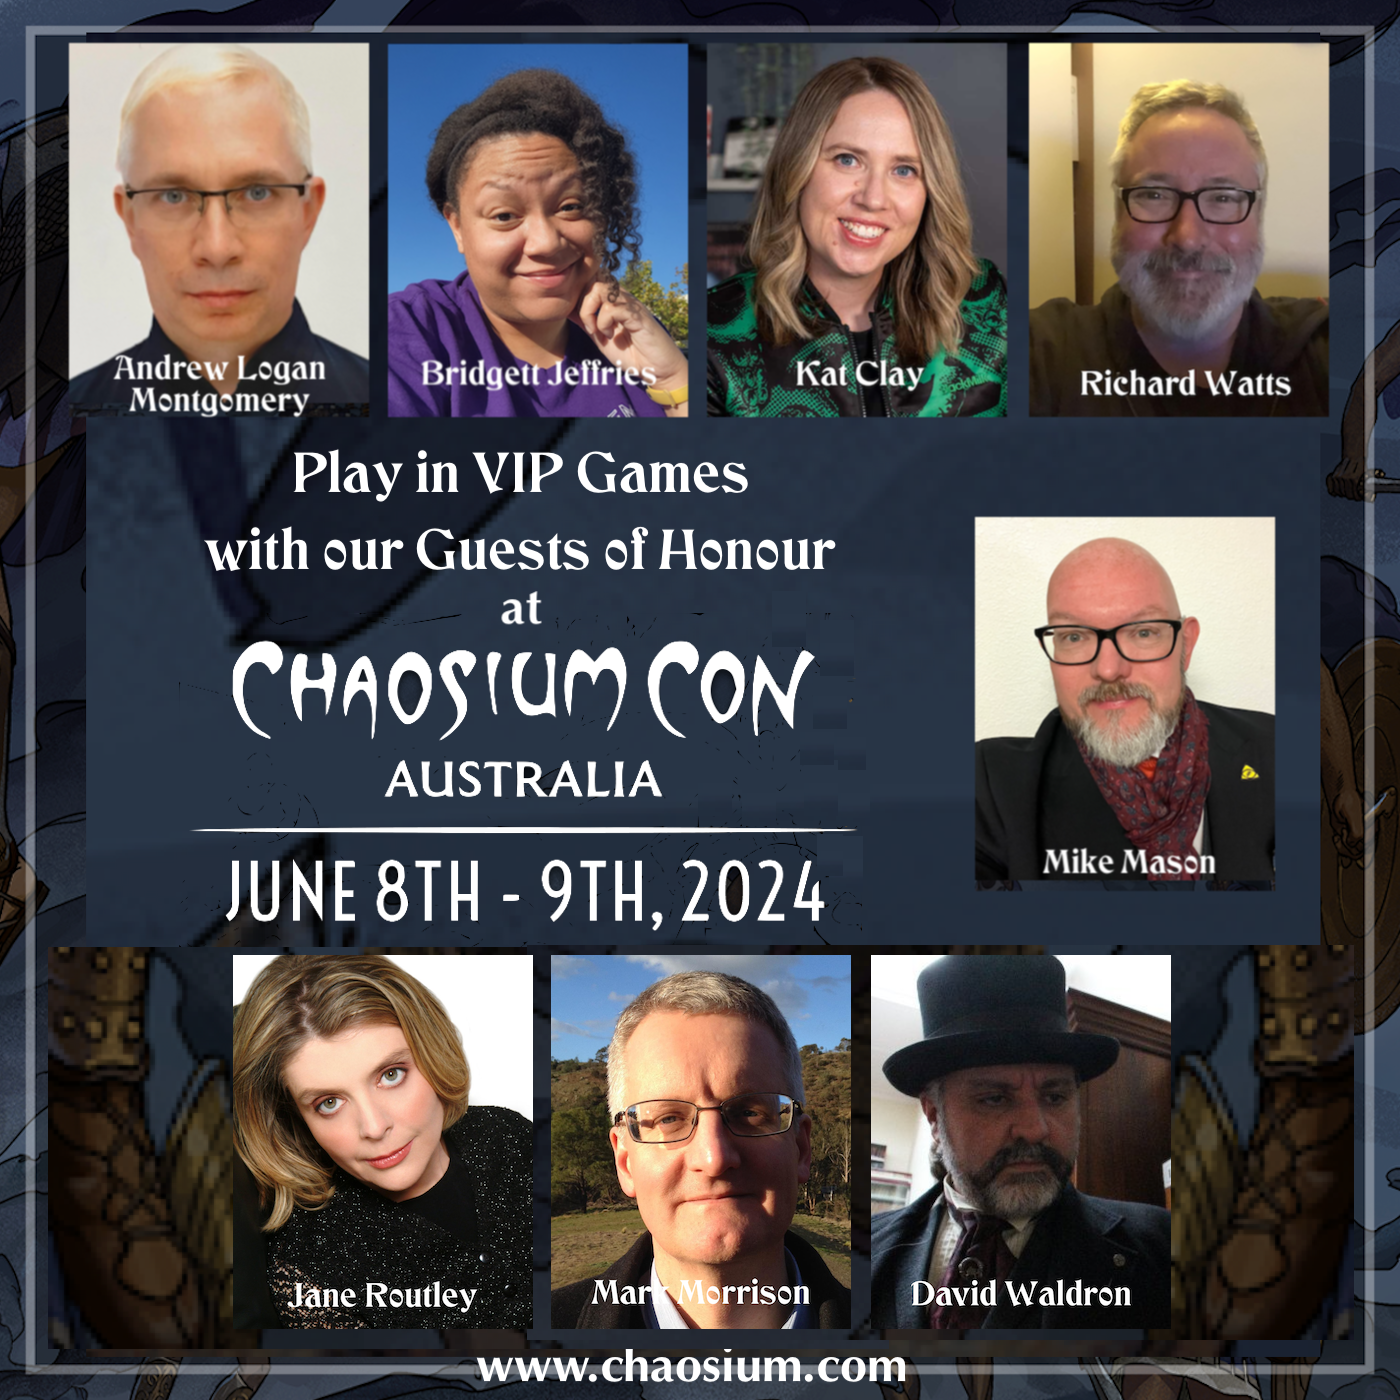 [Chaosium] Chaosium Con Australia: Event Registration now open, check out the VIP Games!